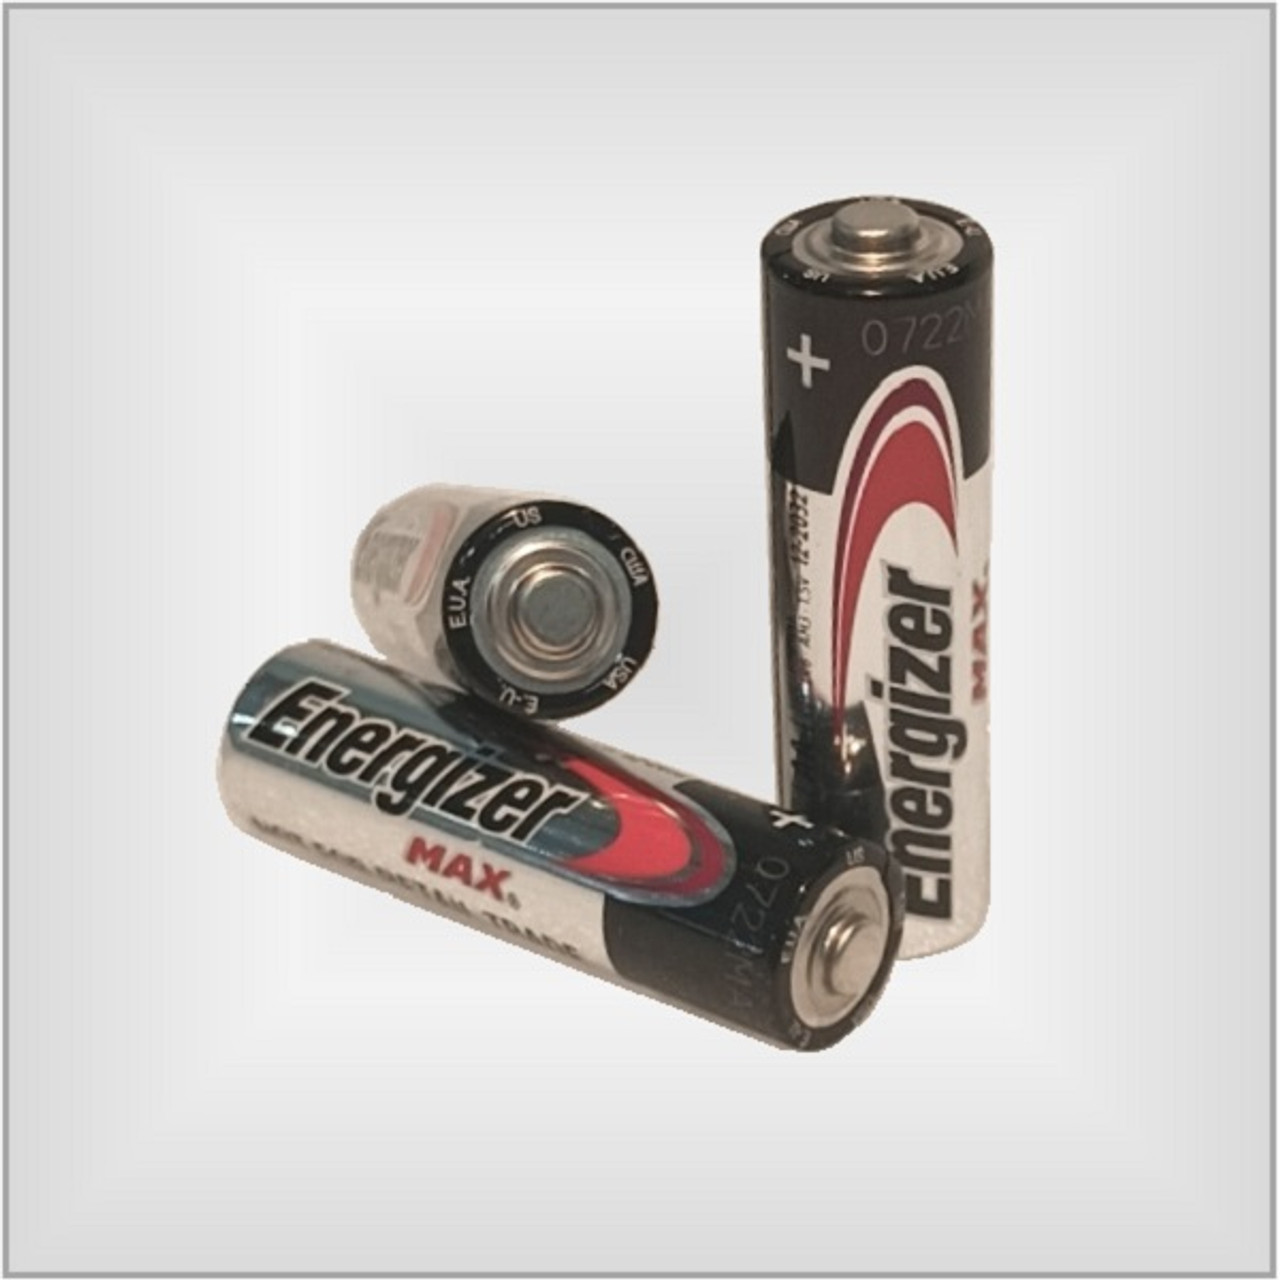 Daily-max Battery - Daily-max Alkaline Battery LR20 D 1.5V